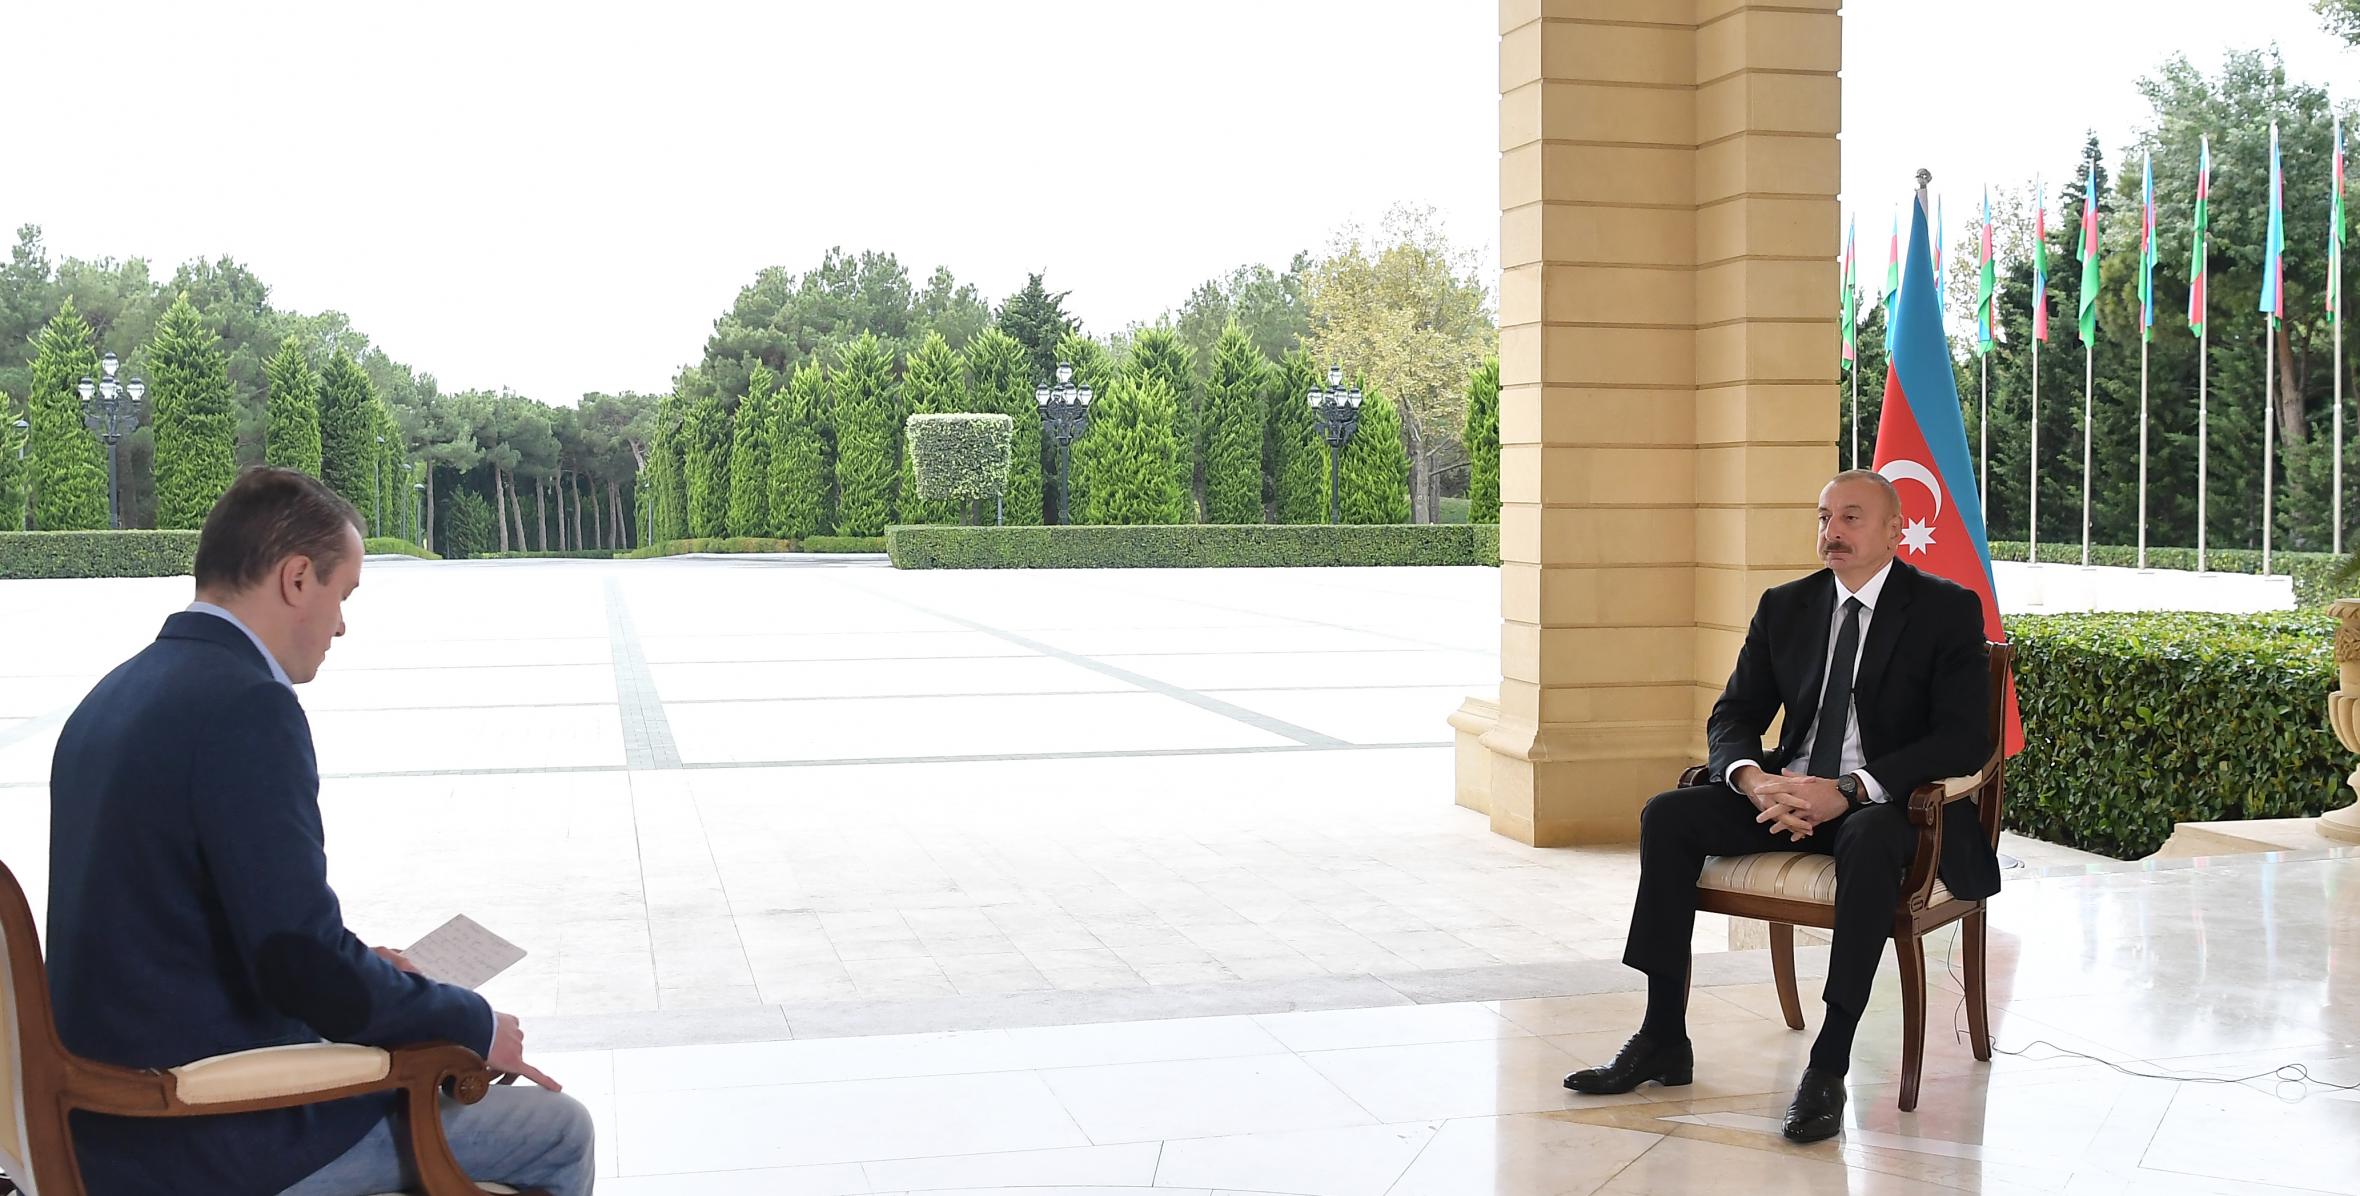 Ilham Aliyev was interviewed by Russian “Perviy Kanal” TV